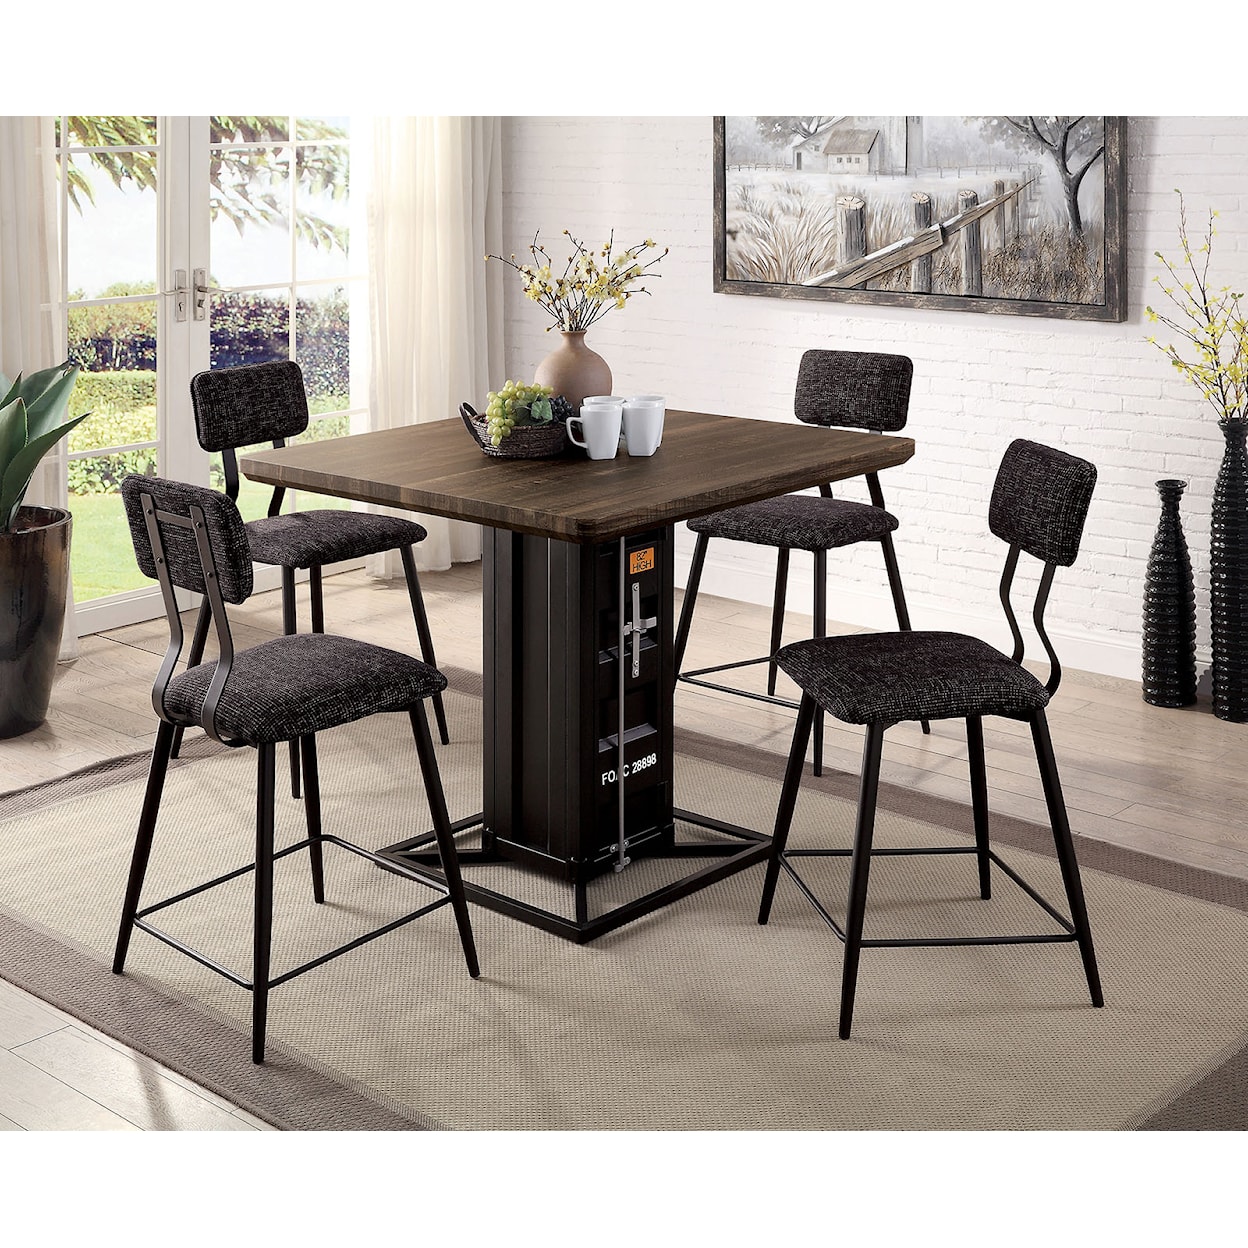 FUSA Esdargo Counter Height Dining Table